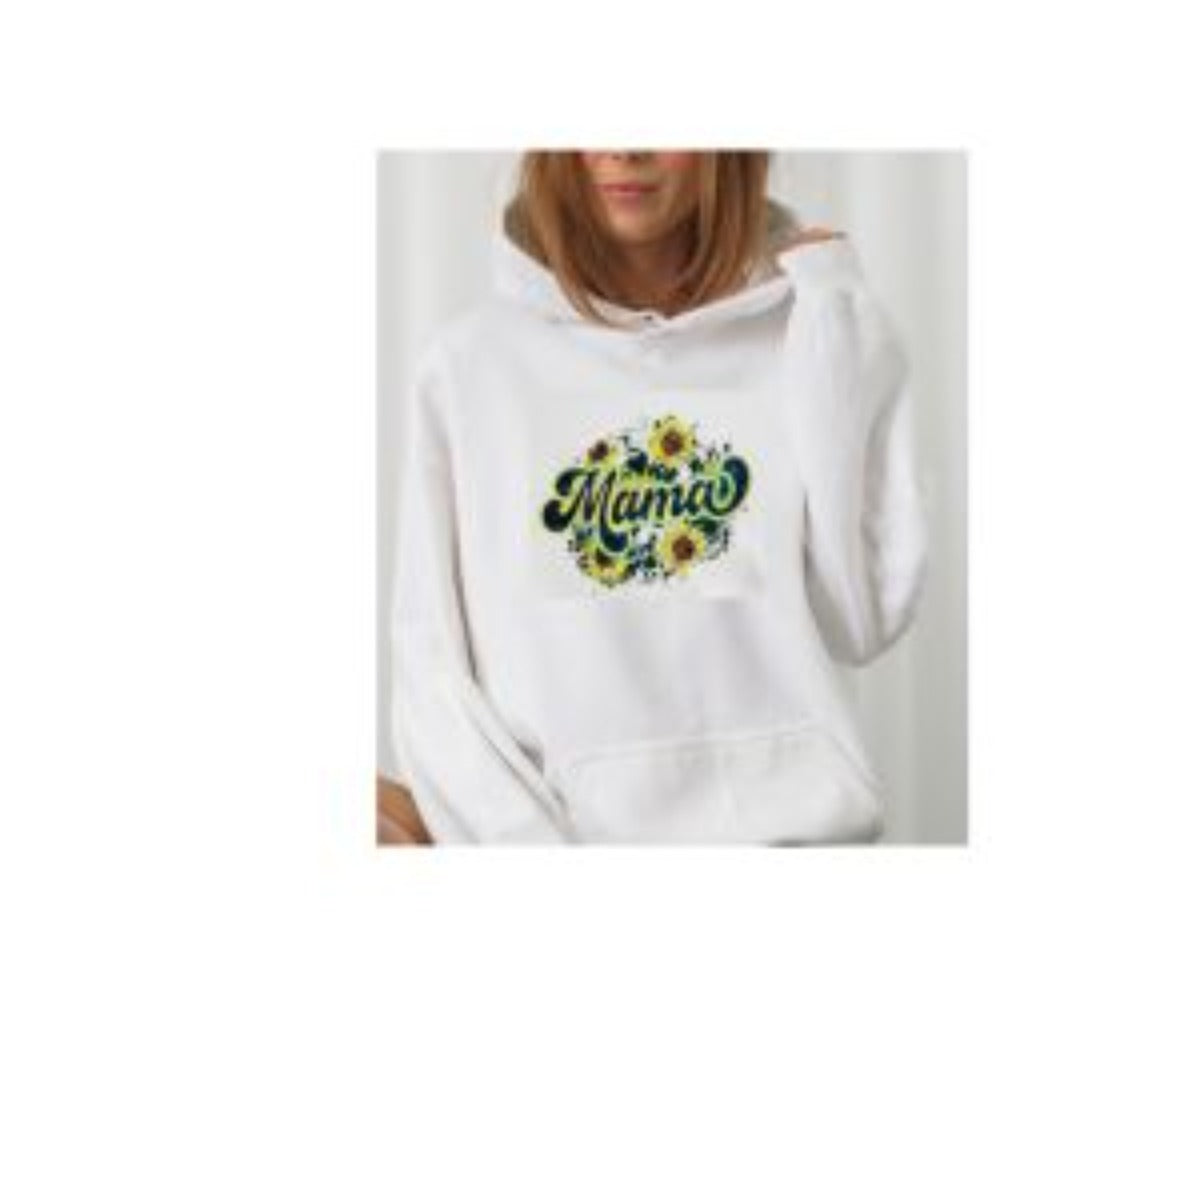 Celebrate your personality with our Sunflower Mama Sweatshirt